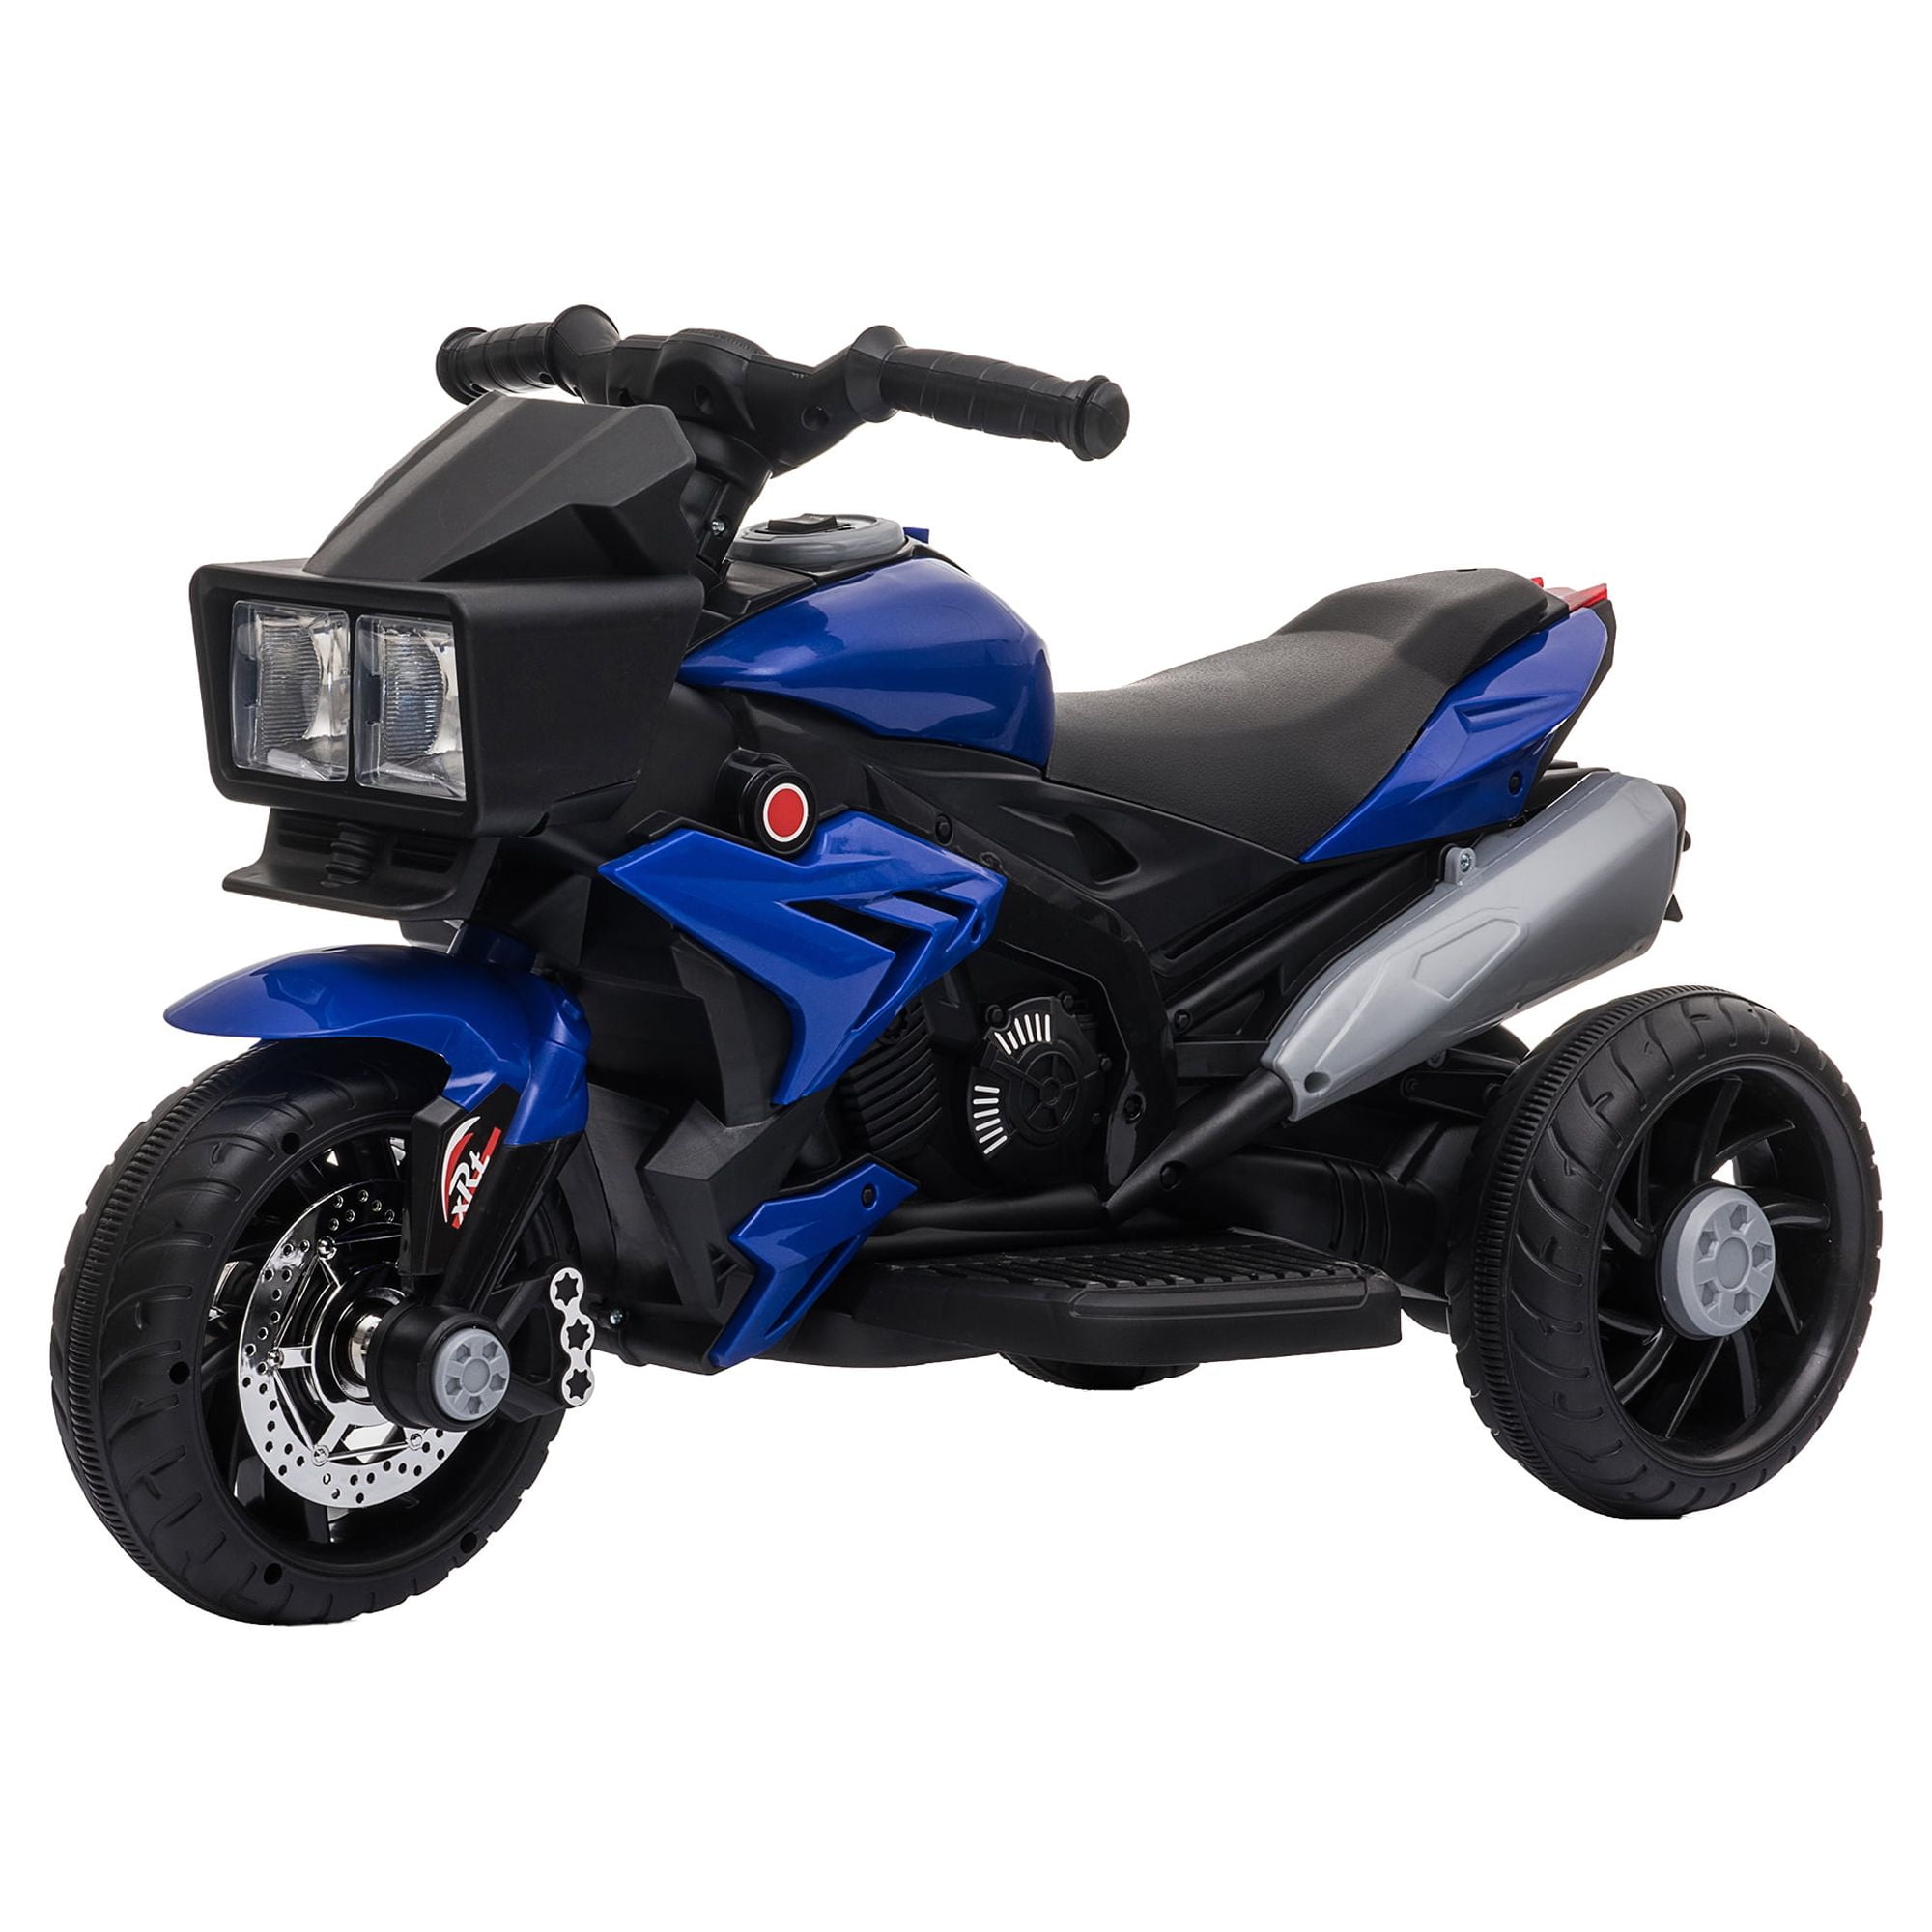 Aosom 6 Volt Motorcycles Pedal Ride On Toy & Reviews